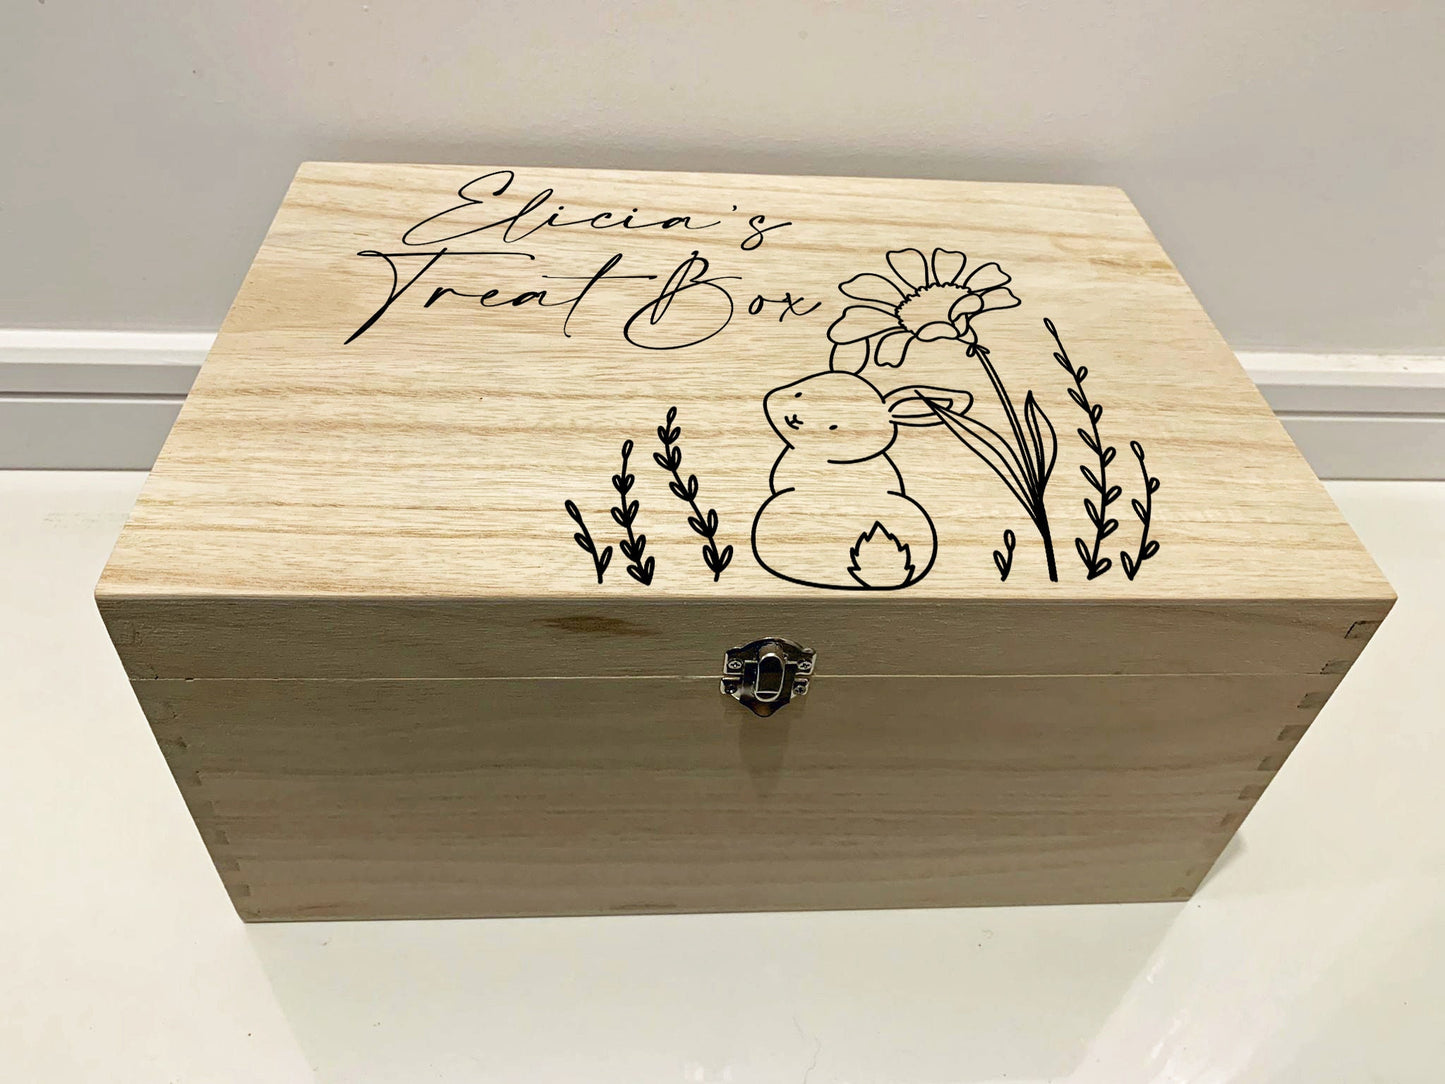 Large Personalised Engraved Wooden Easter Treat Box, Keepsake Box, Memory Box with Bunny in some Flowers - Resplendent Aurora